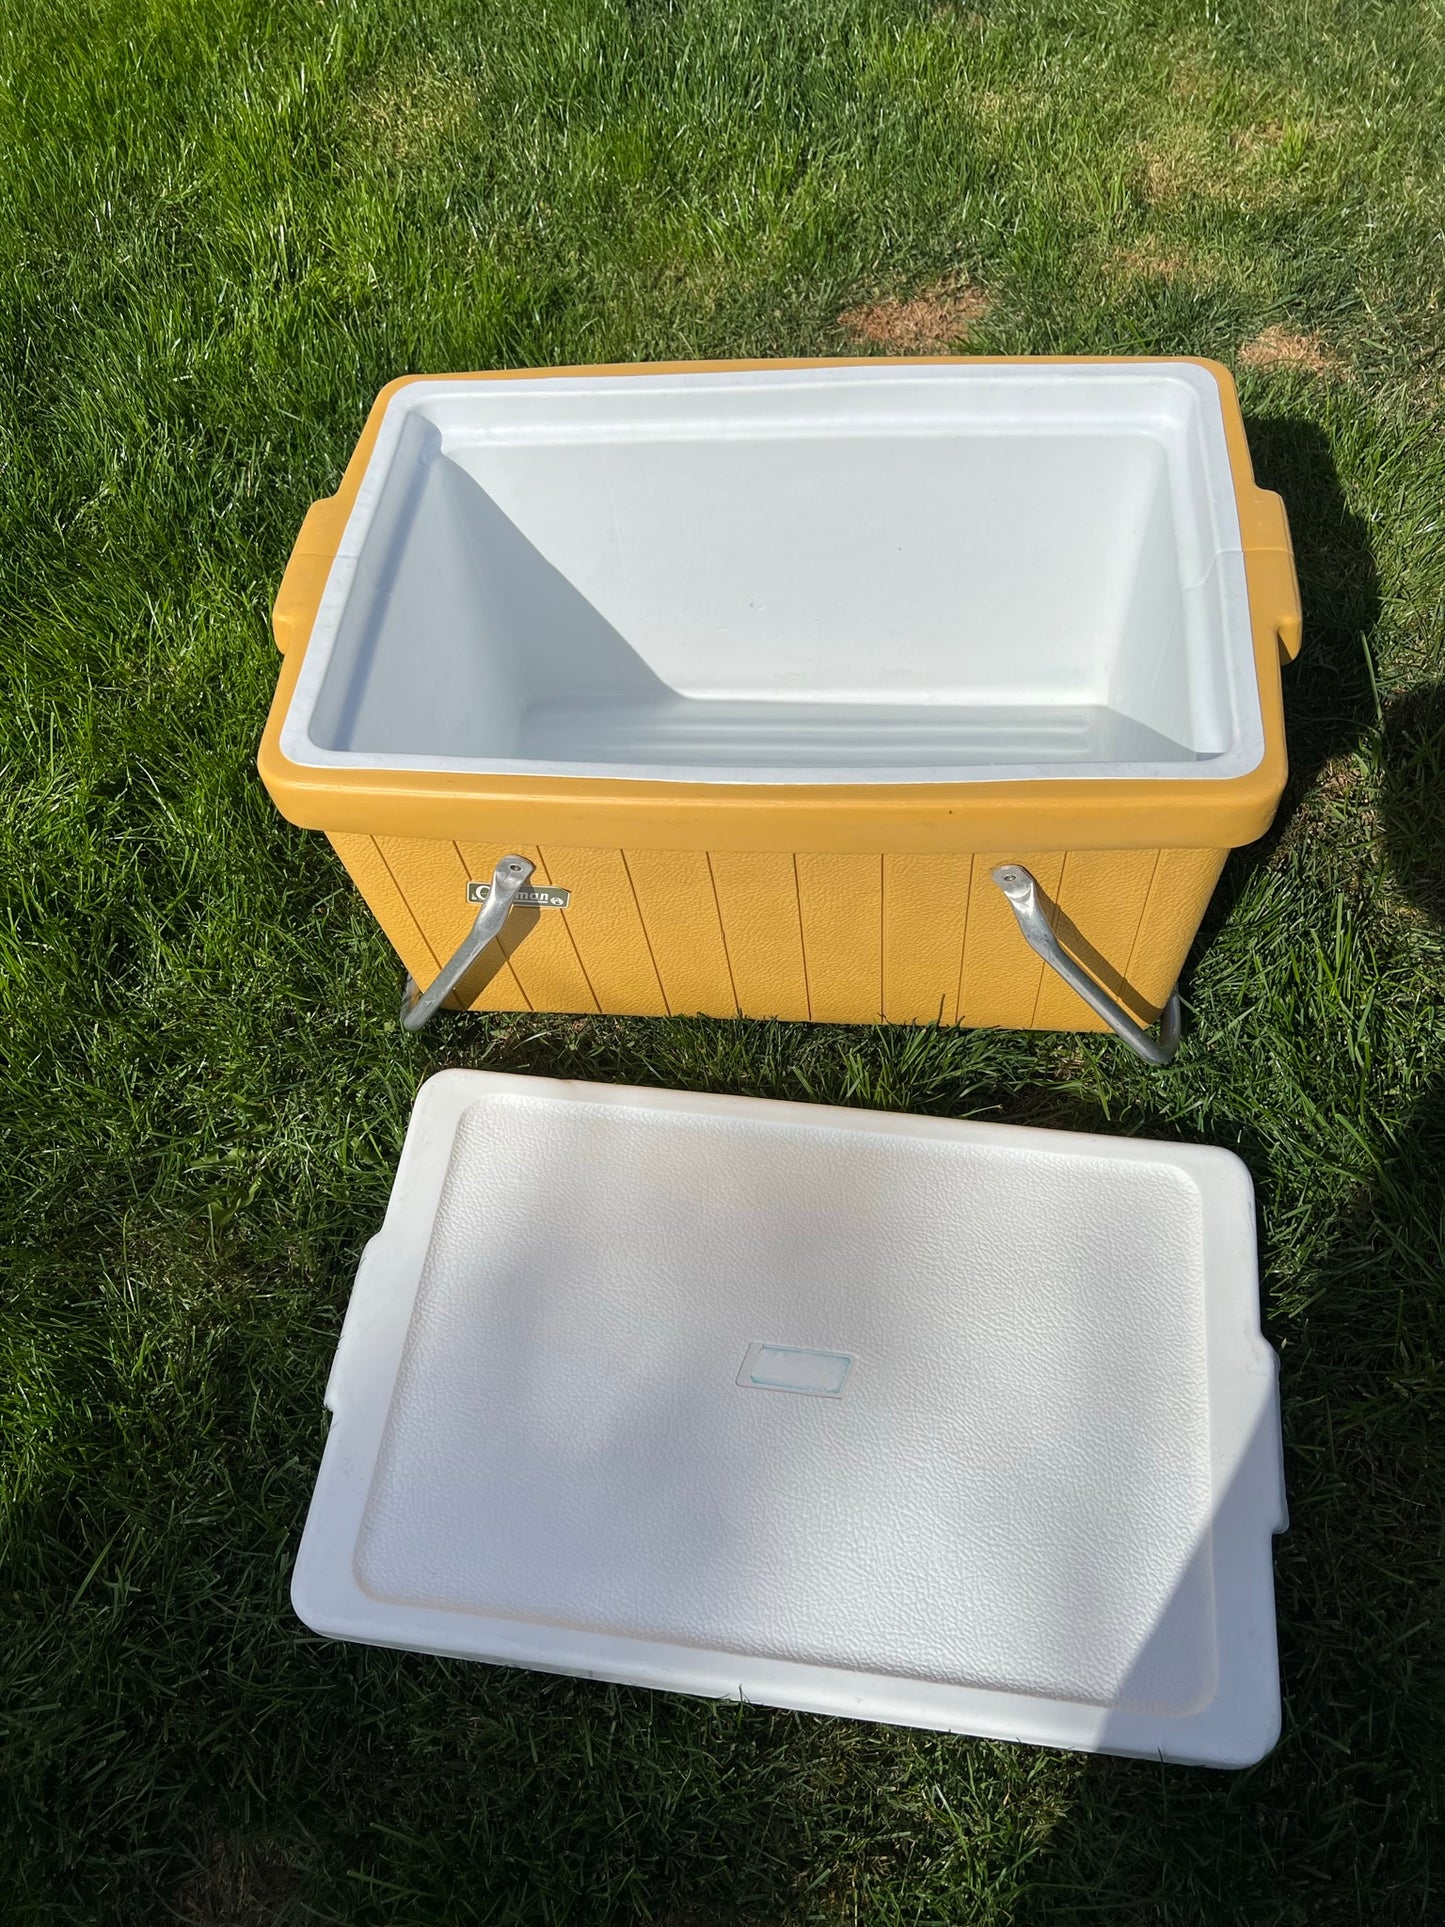 Vintage 1970's Coleman Picnic Park Outdoor Camping Cooler Ice Chest with Aluminium Carrying Handles Lemon Yellow White Excellent With Drain Plug Very RARE